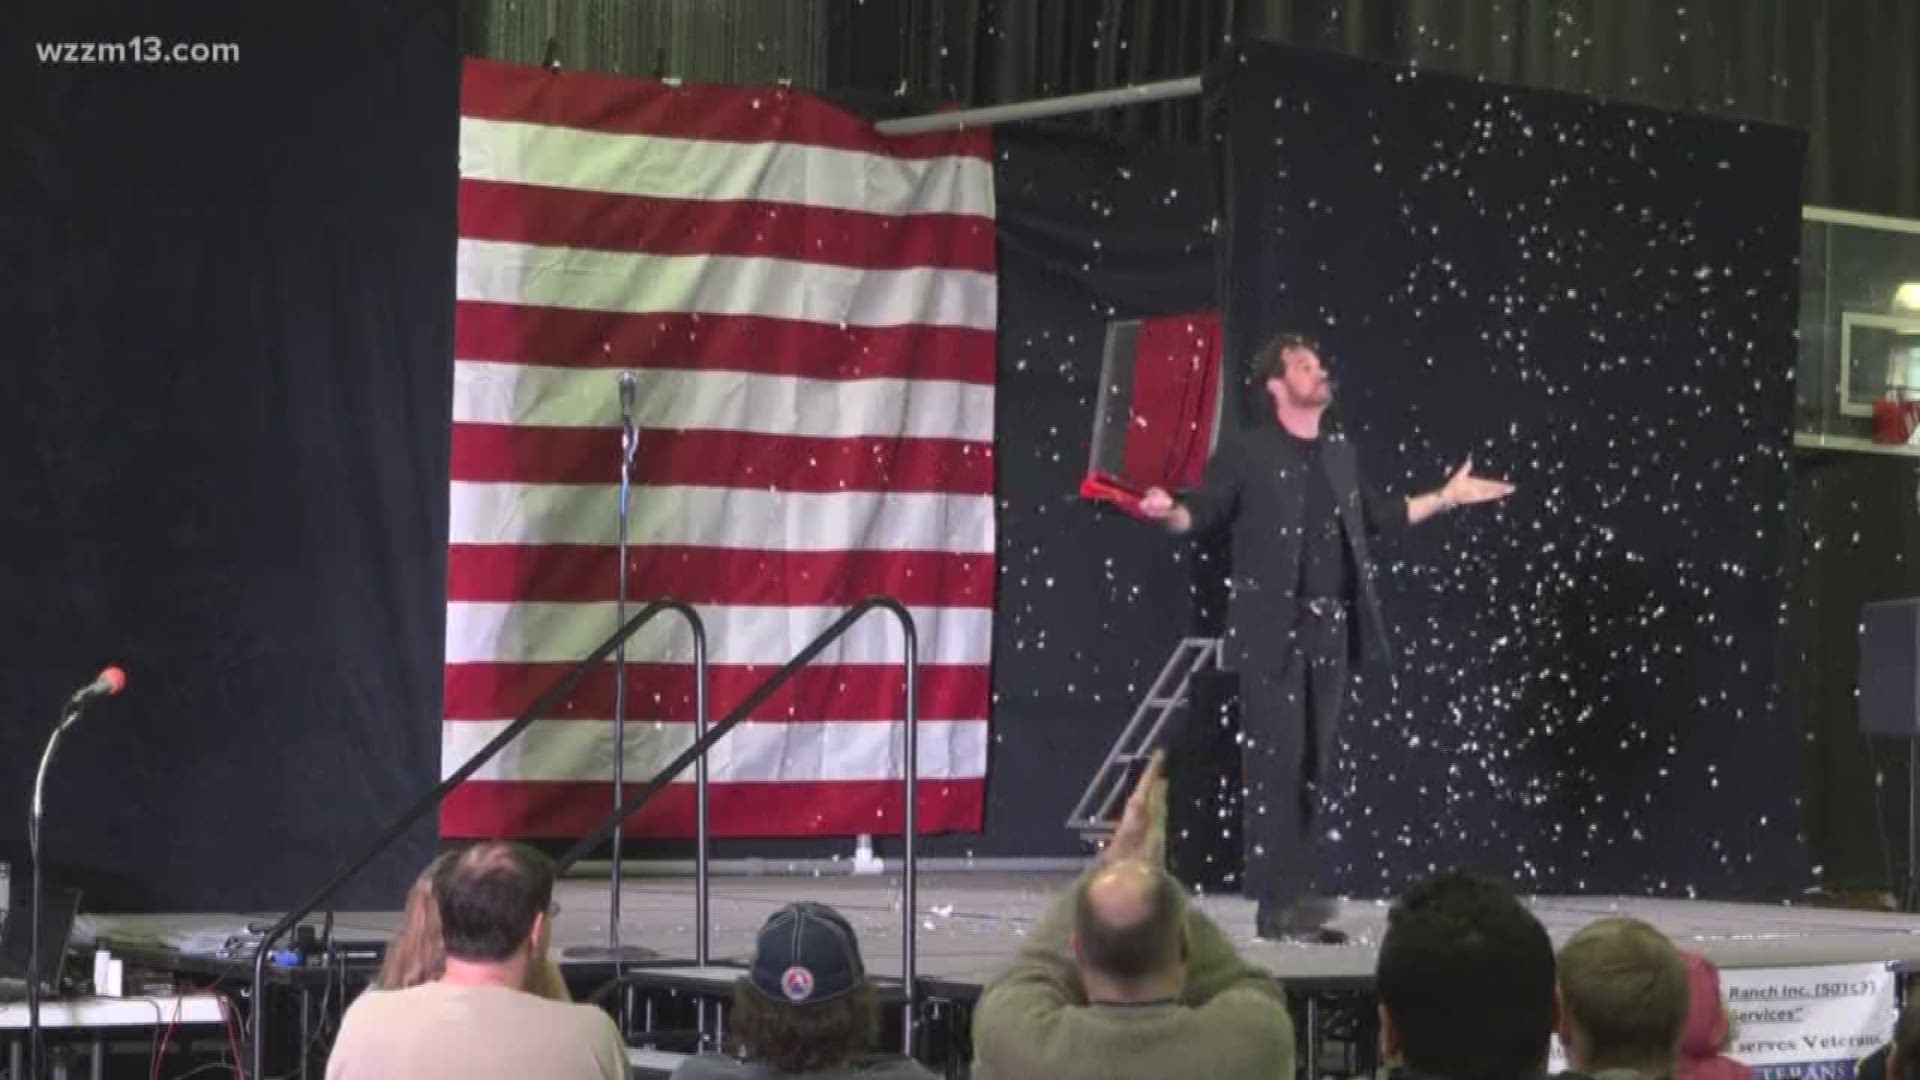 Community members gather for a magic show that benefits local veterans.